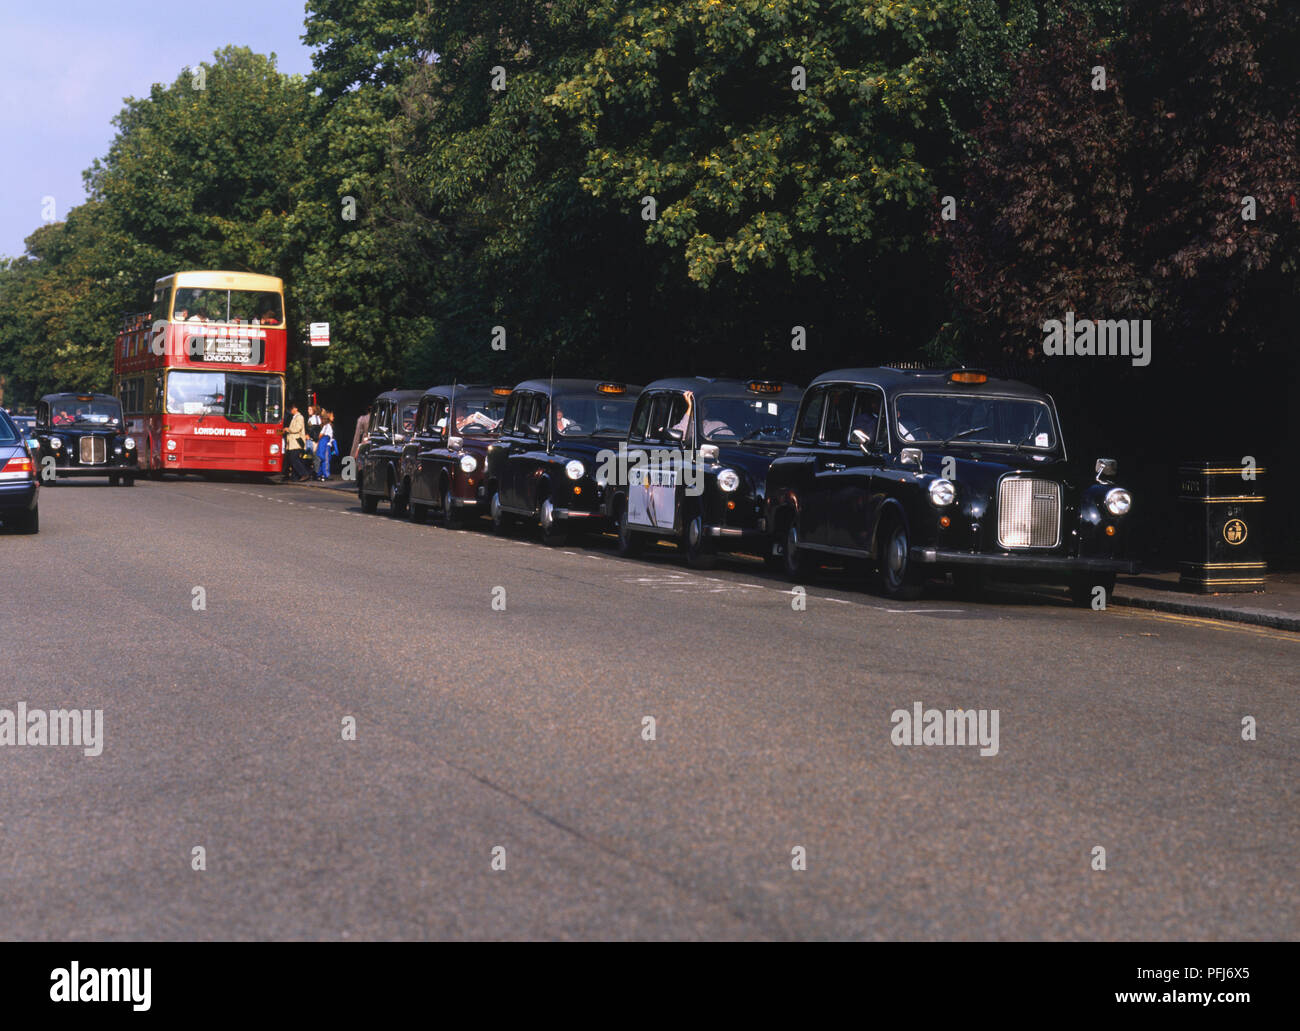 Great Britain, England, London, line of parked black cabs, red open-top sightseeing bus in background, front view. Stock Photo